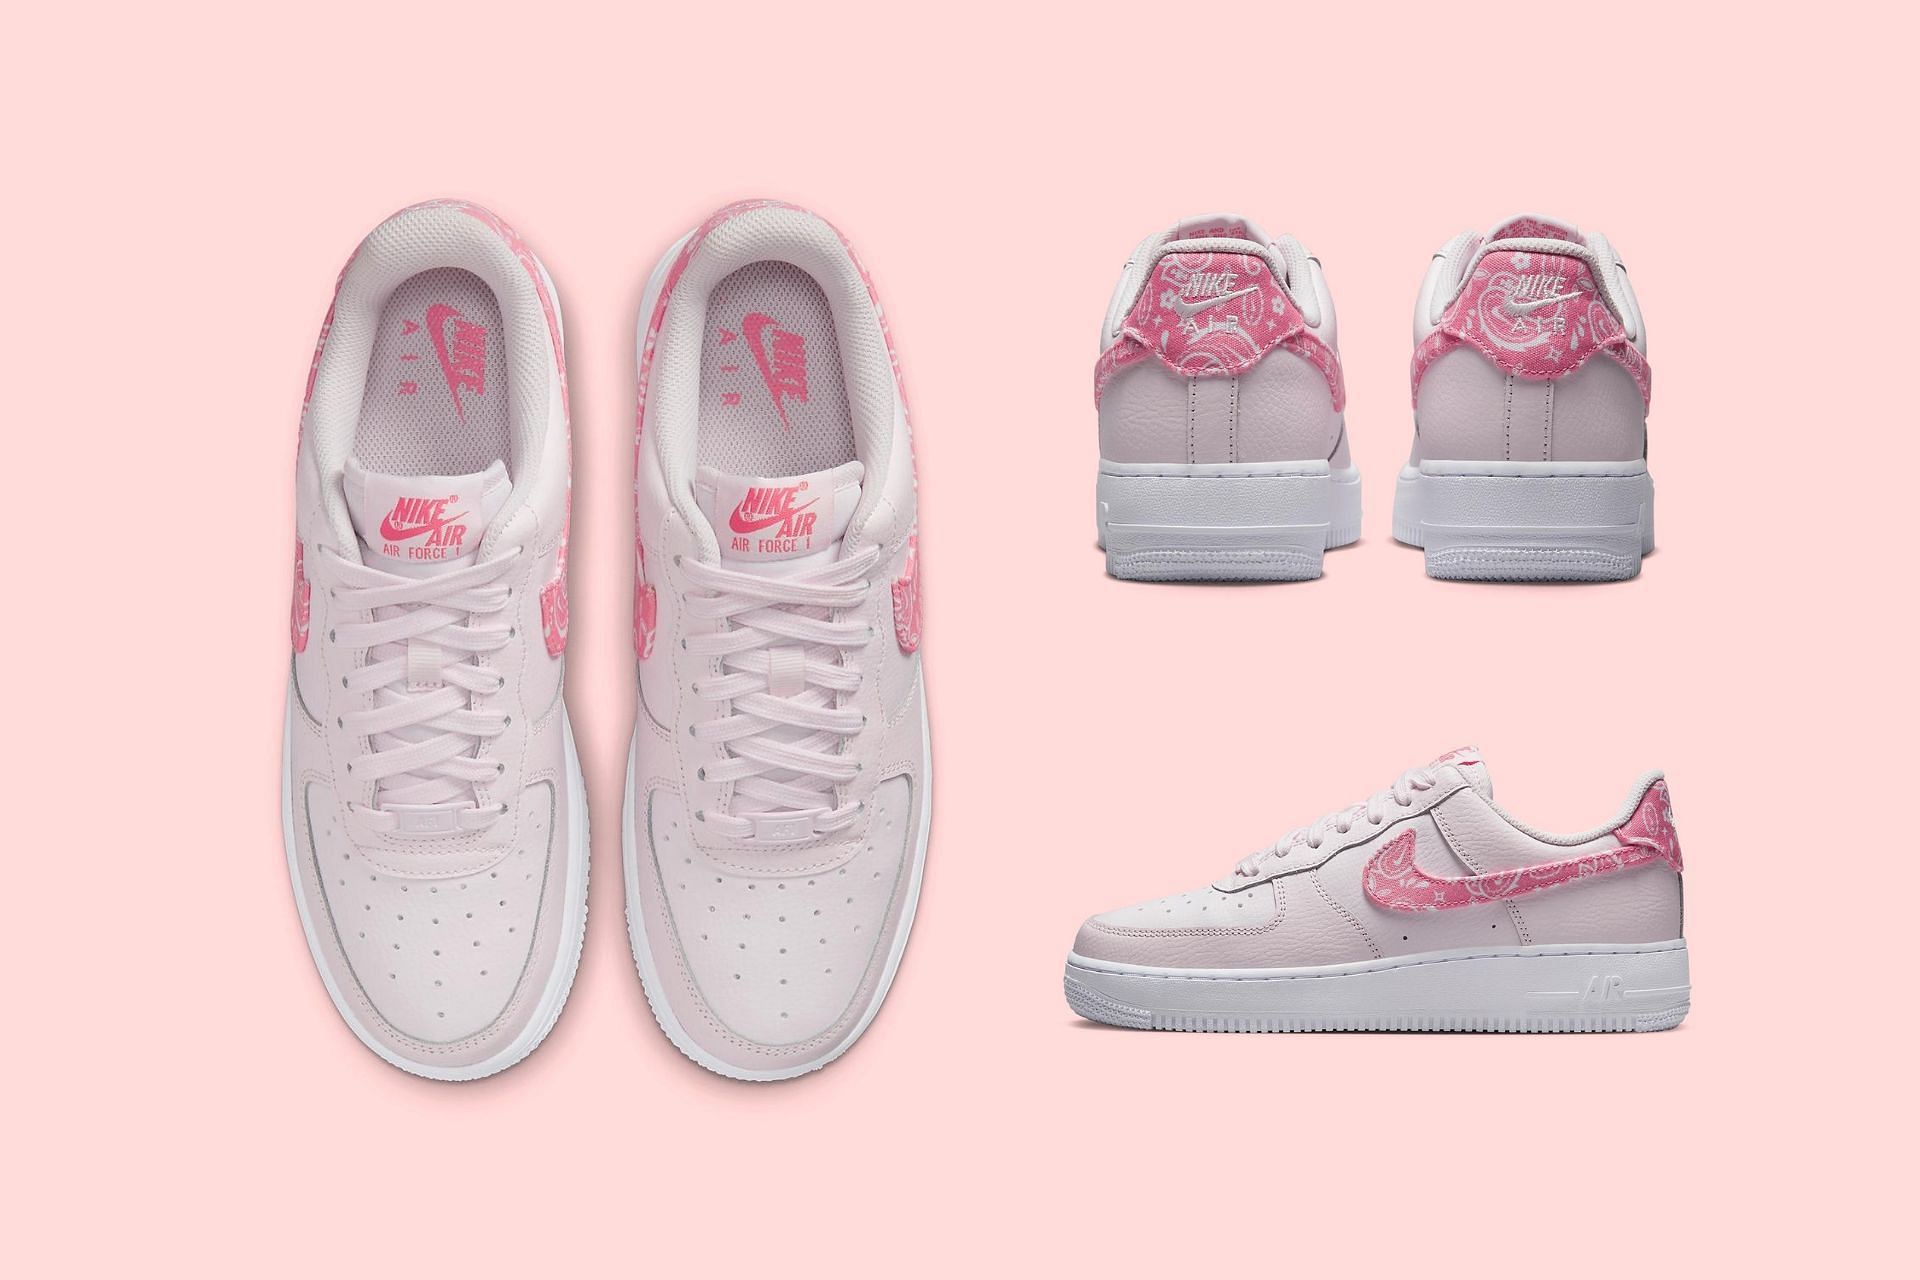 Where to buy Nike Air Force 1 Low Pink Paisley? Everything we know so far